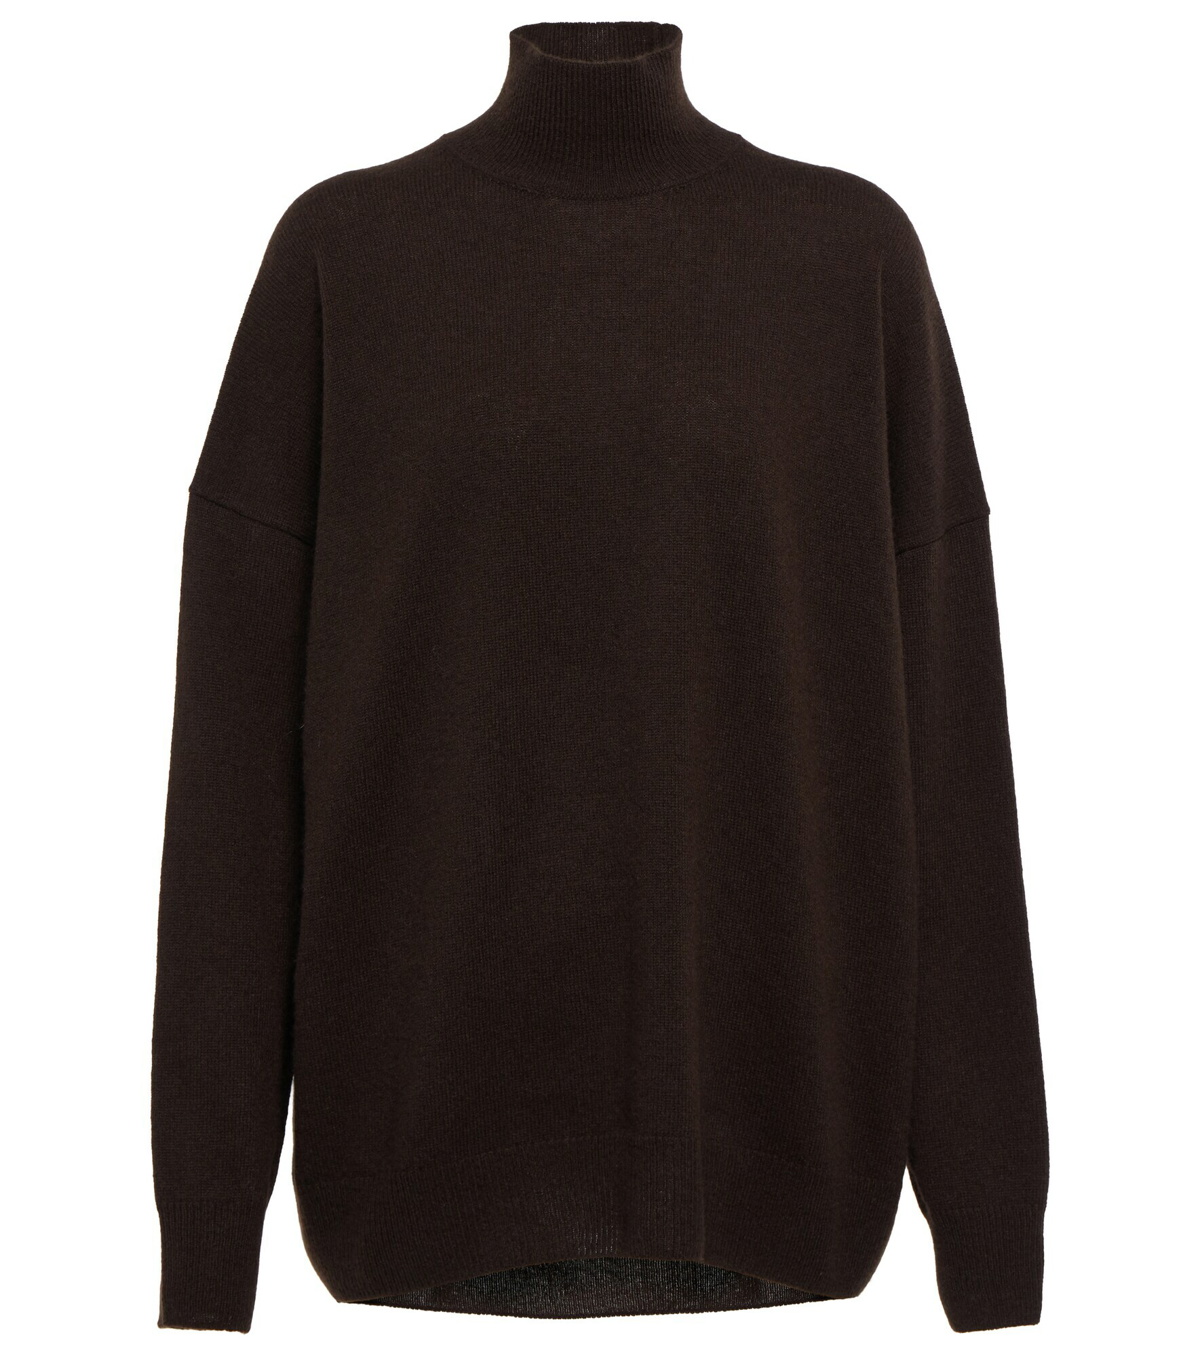 The Row - Dohan cashmere turtleneck sweater The Row